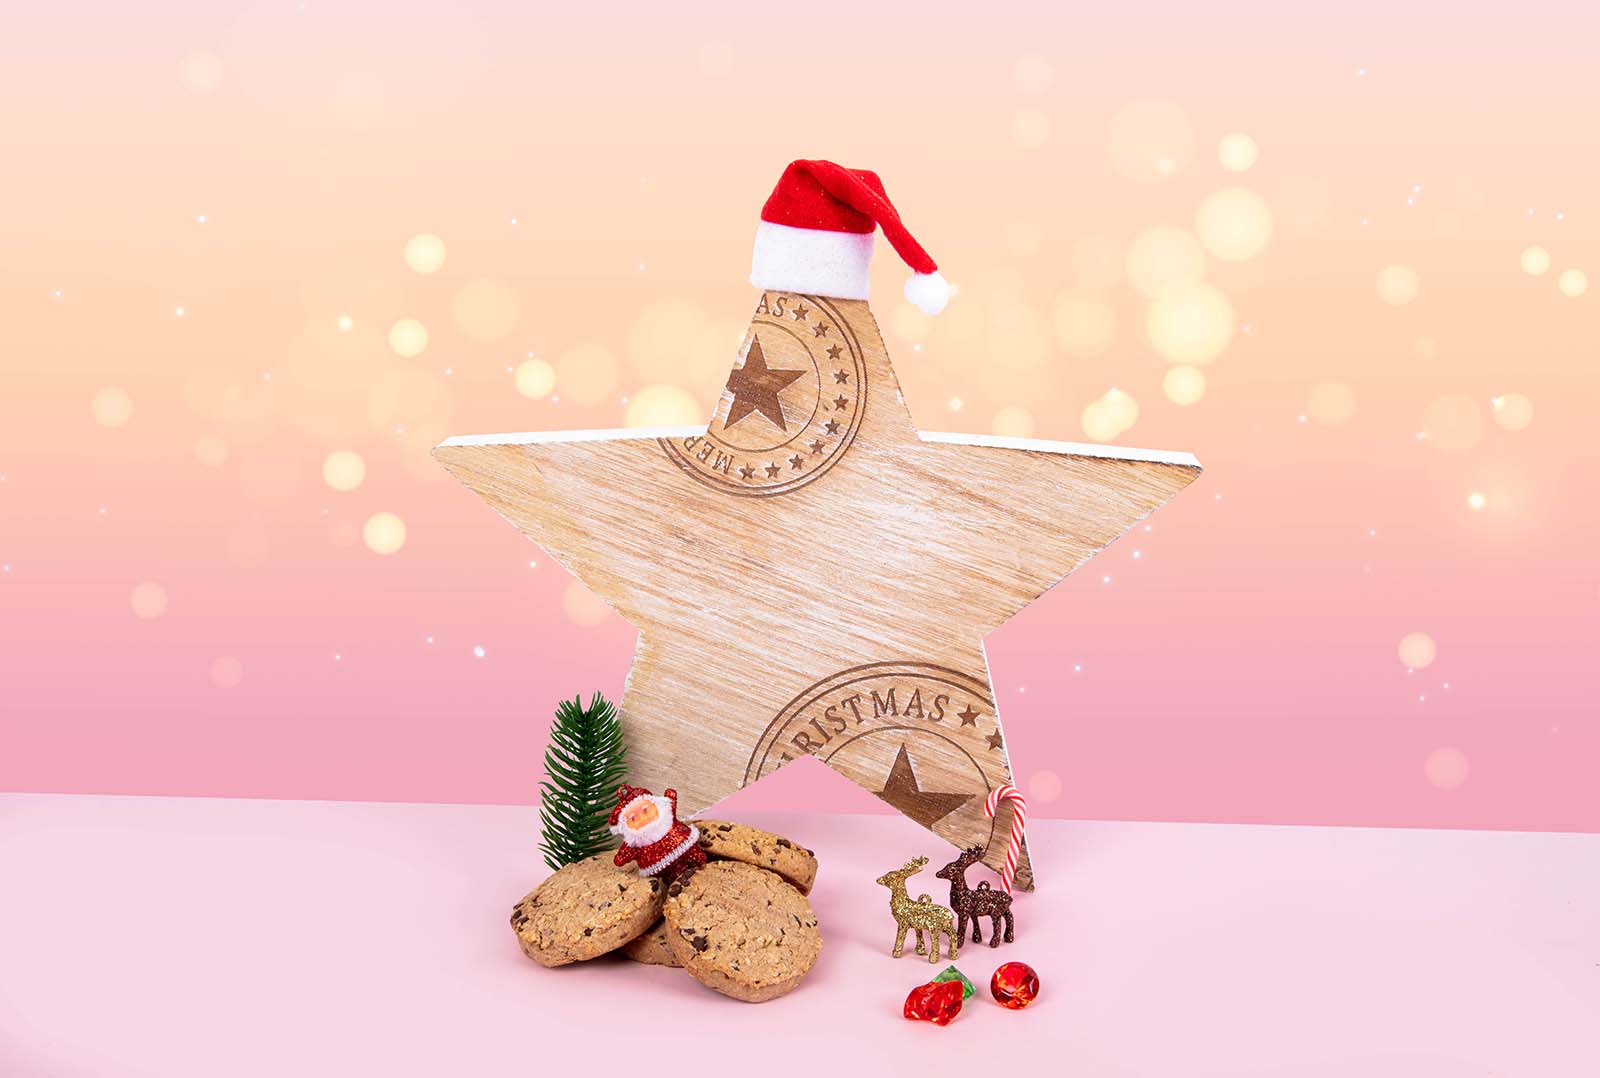 Pink Festive Christmas Photo for a Lactation Cookie Brand by Megzie Makes